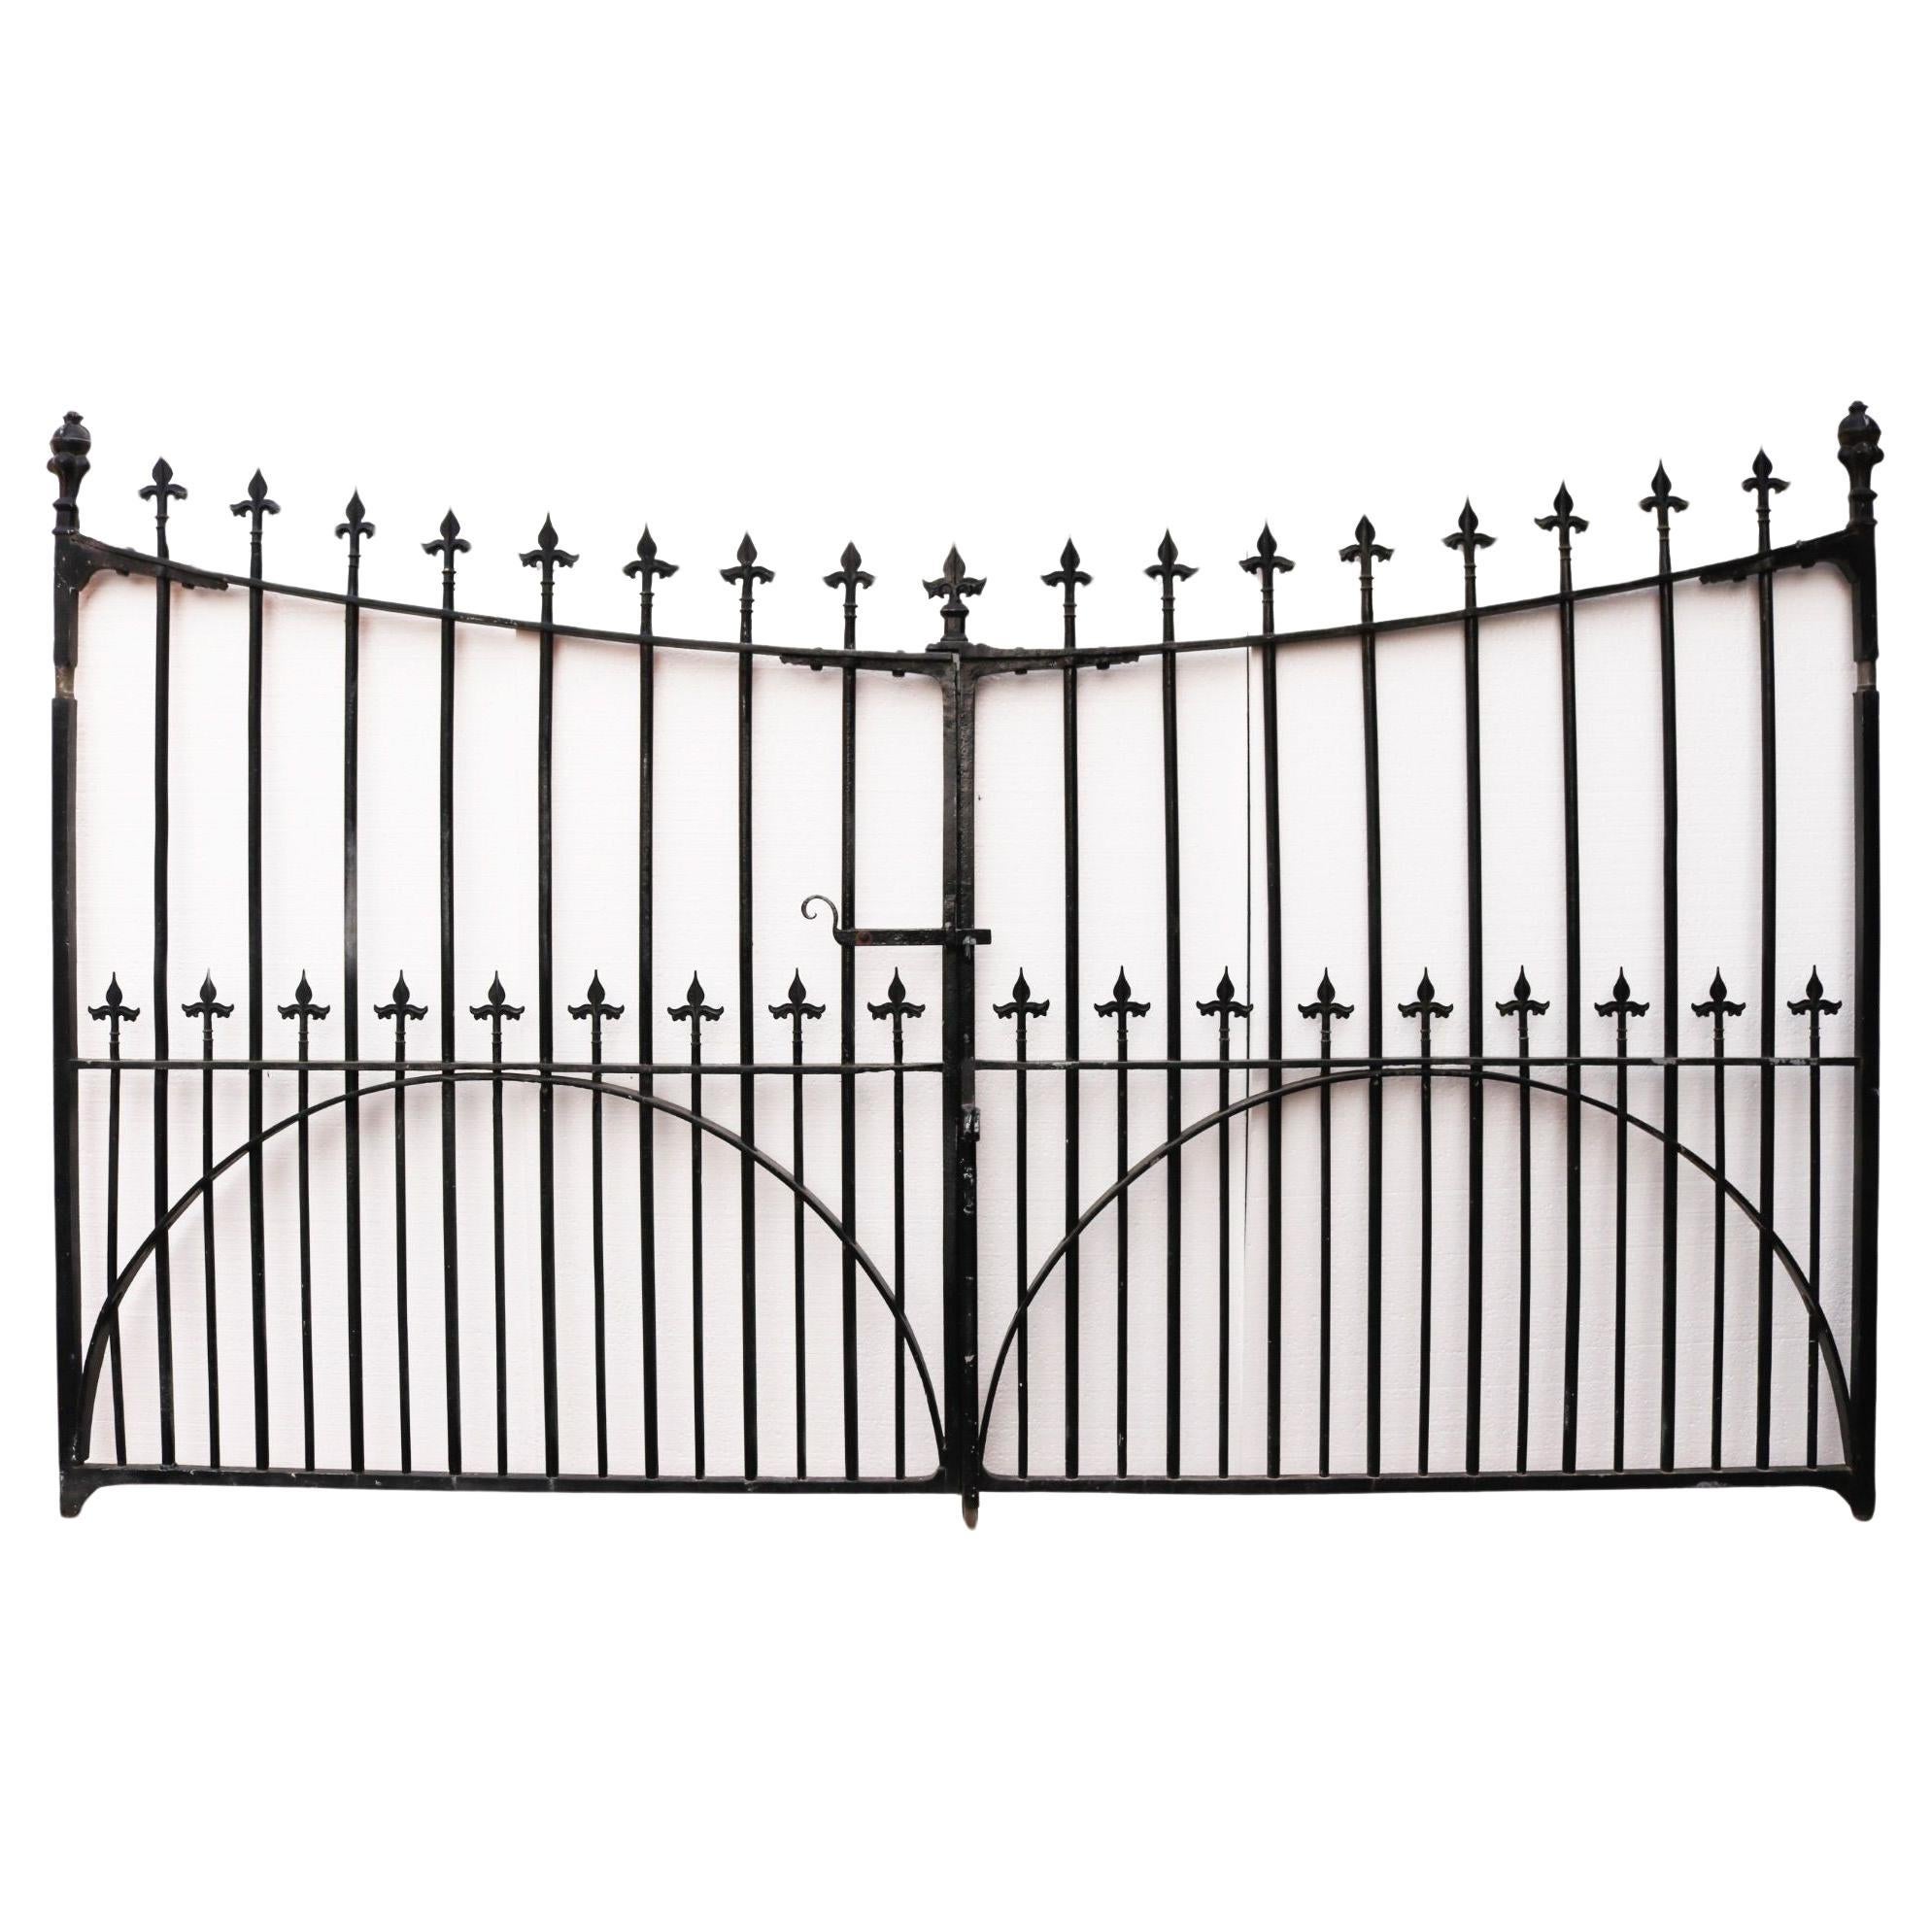 Pair of Victorian Wrought Iron Driveway Gates 307cm (10ft)